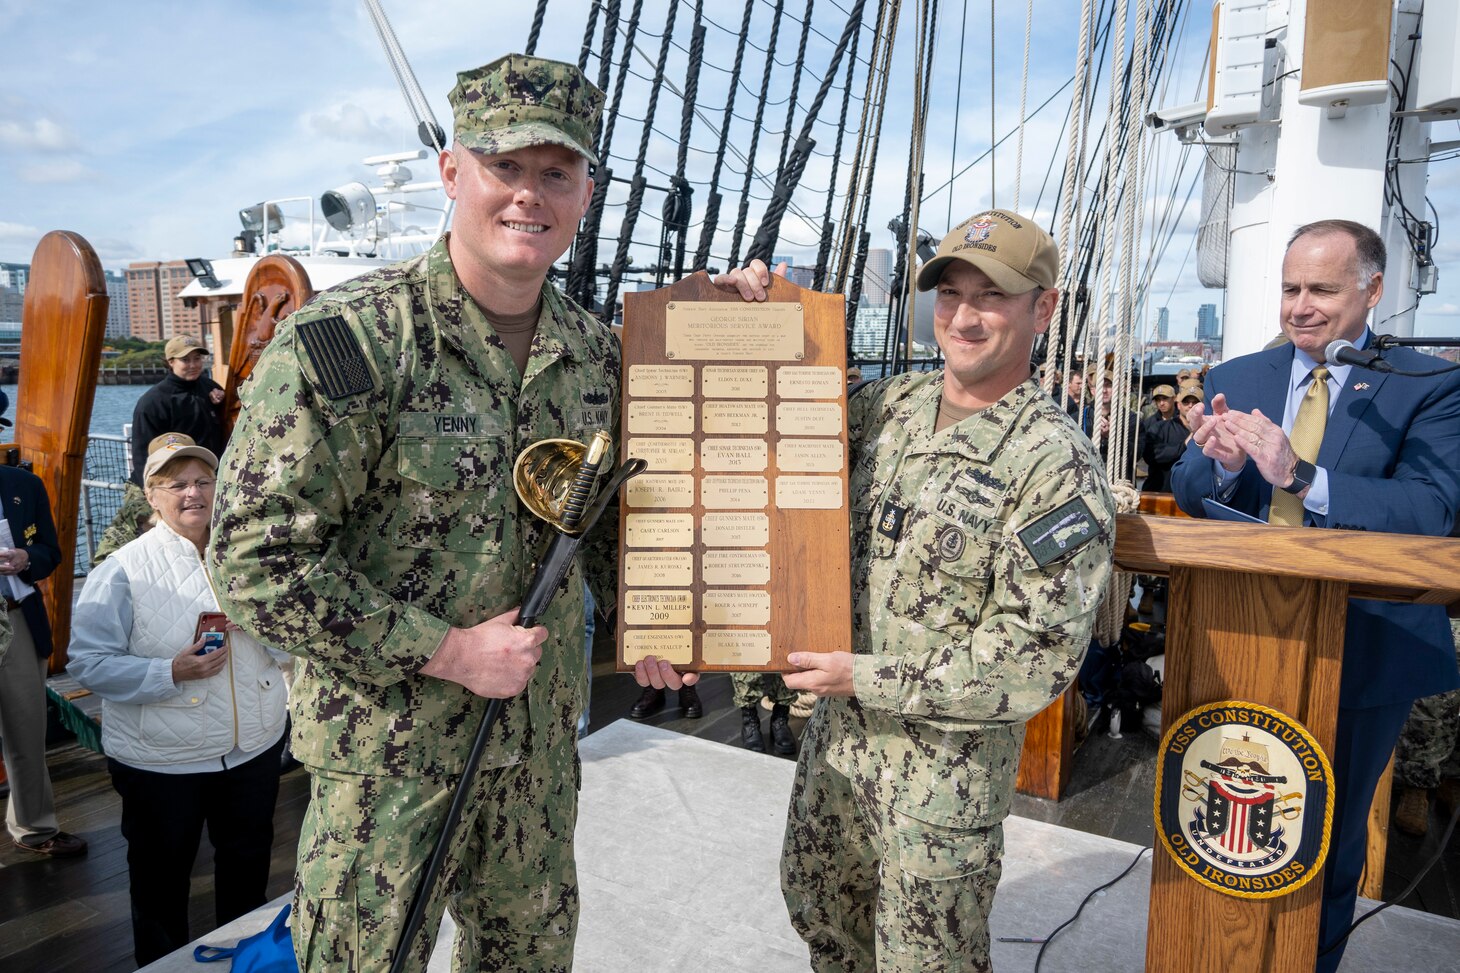 BOSTON (Sept. 30, 2022) Command Senior Chief Seth Miles, right, presents Chief Gas Turbine Systems Technician (Mechanical) Adam Yenny with the 2021 USS Constitution George Sirian Meritorious Leadership Award plaque while underway aboard USS Constitution. The USS Constitution George Sirian Meritorious Leadership Award recognizes a chief petty officer who embodies former USS Constitution crew member George Sirian through their technical expertise, dedication, and leadership. USS Constitution, is the world’s oldest commissioned warship afloat, and played a crucial role in the Barbary Wars and the War of 1812, actively defending sea lanes from 1797 to 1855. During normal operations, the active-duty Sailors stationed aboard USS Constitution provide free tours and offer public visitation to more than 600,000 people a year as they support the ship’s mission of promoting the Navy’s history and maritime heritage and raising awareness of the importance of a sustained naval presence. USS Constitution was undefeated in battle and destroyed or captured 33 opponents. The ship earned the nickname of Old Ironsides during the war of 1812 when British cannonballs were seen bouncing off the ship’s wooden hull. (U.S. Navy Photo Illustration by Mass Communication Specialist 1st Class Grant G. Grady/Released)